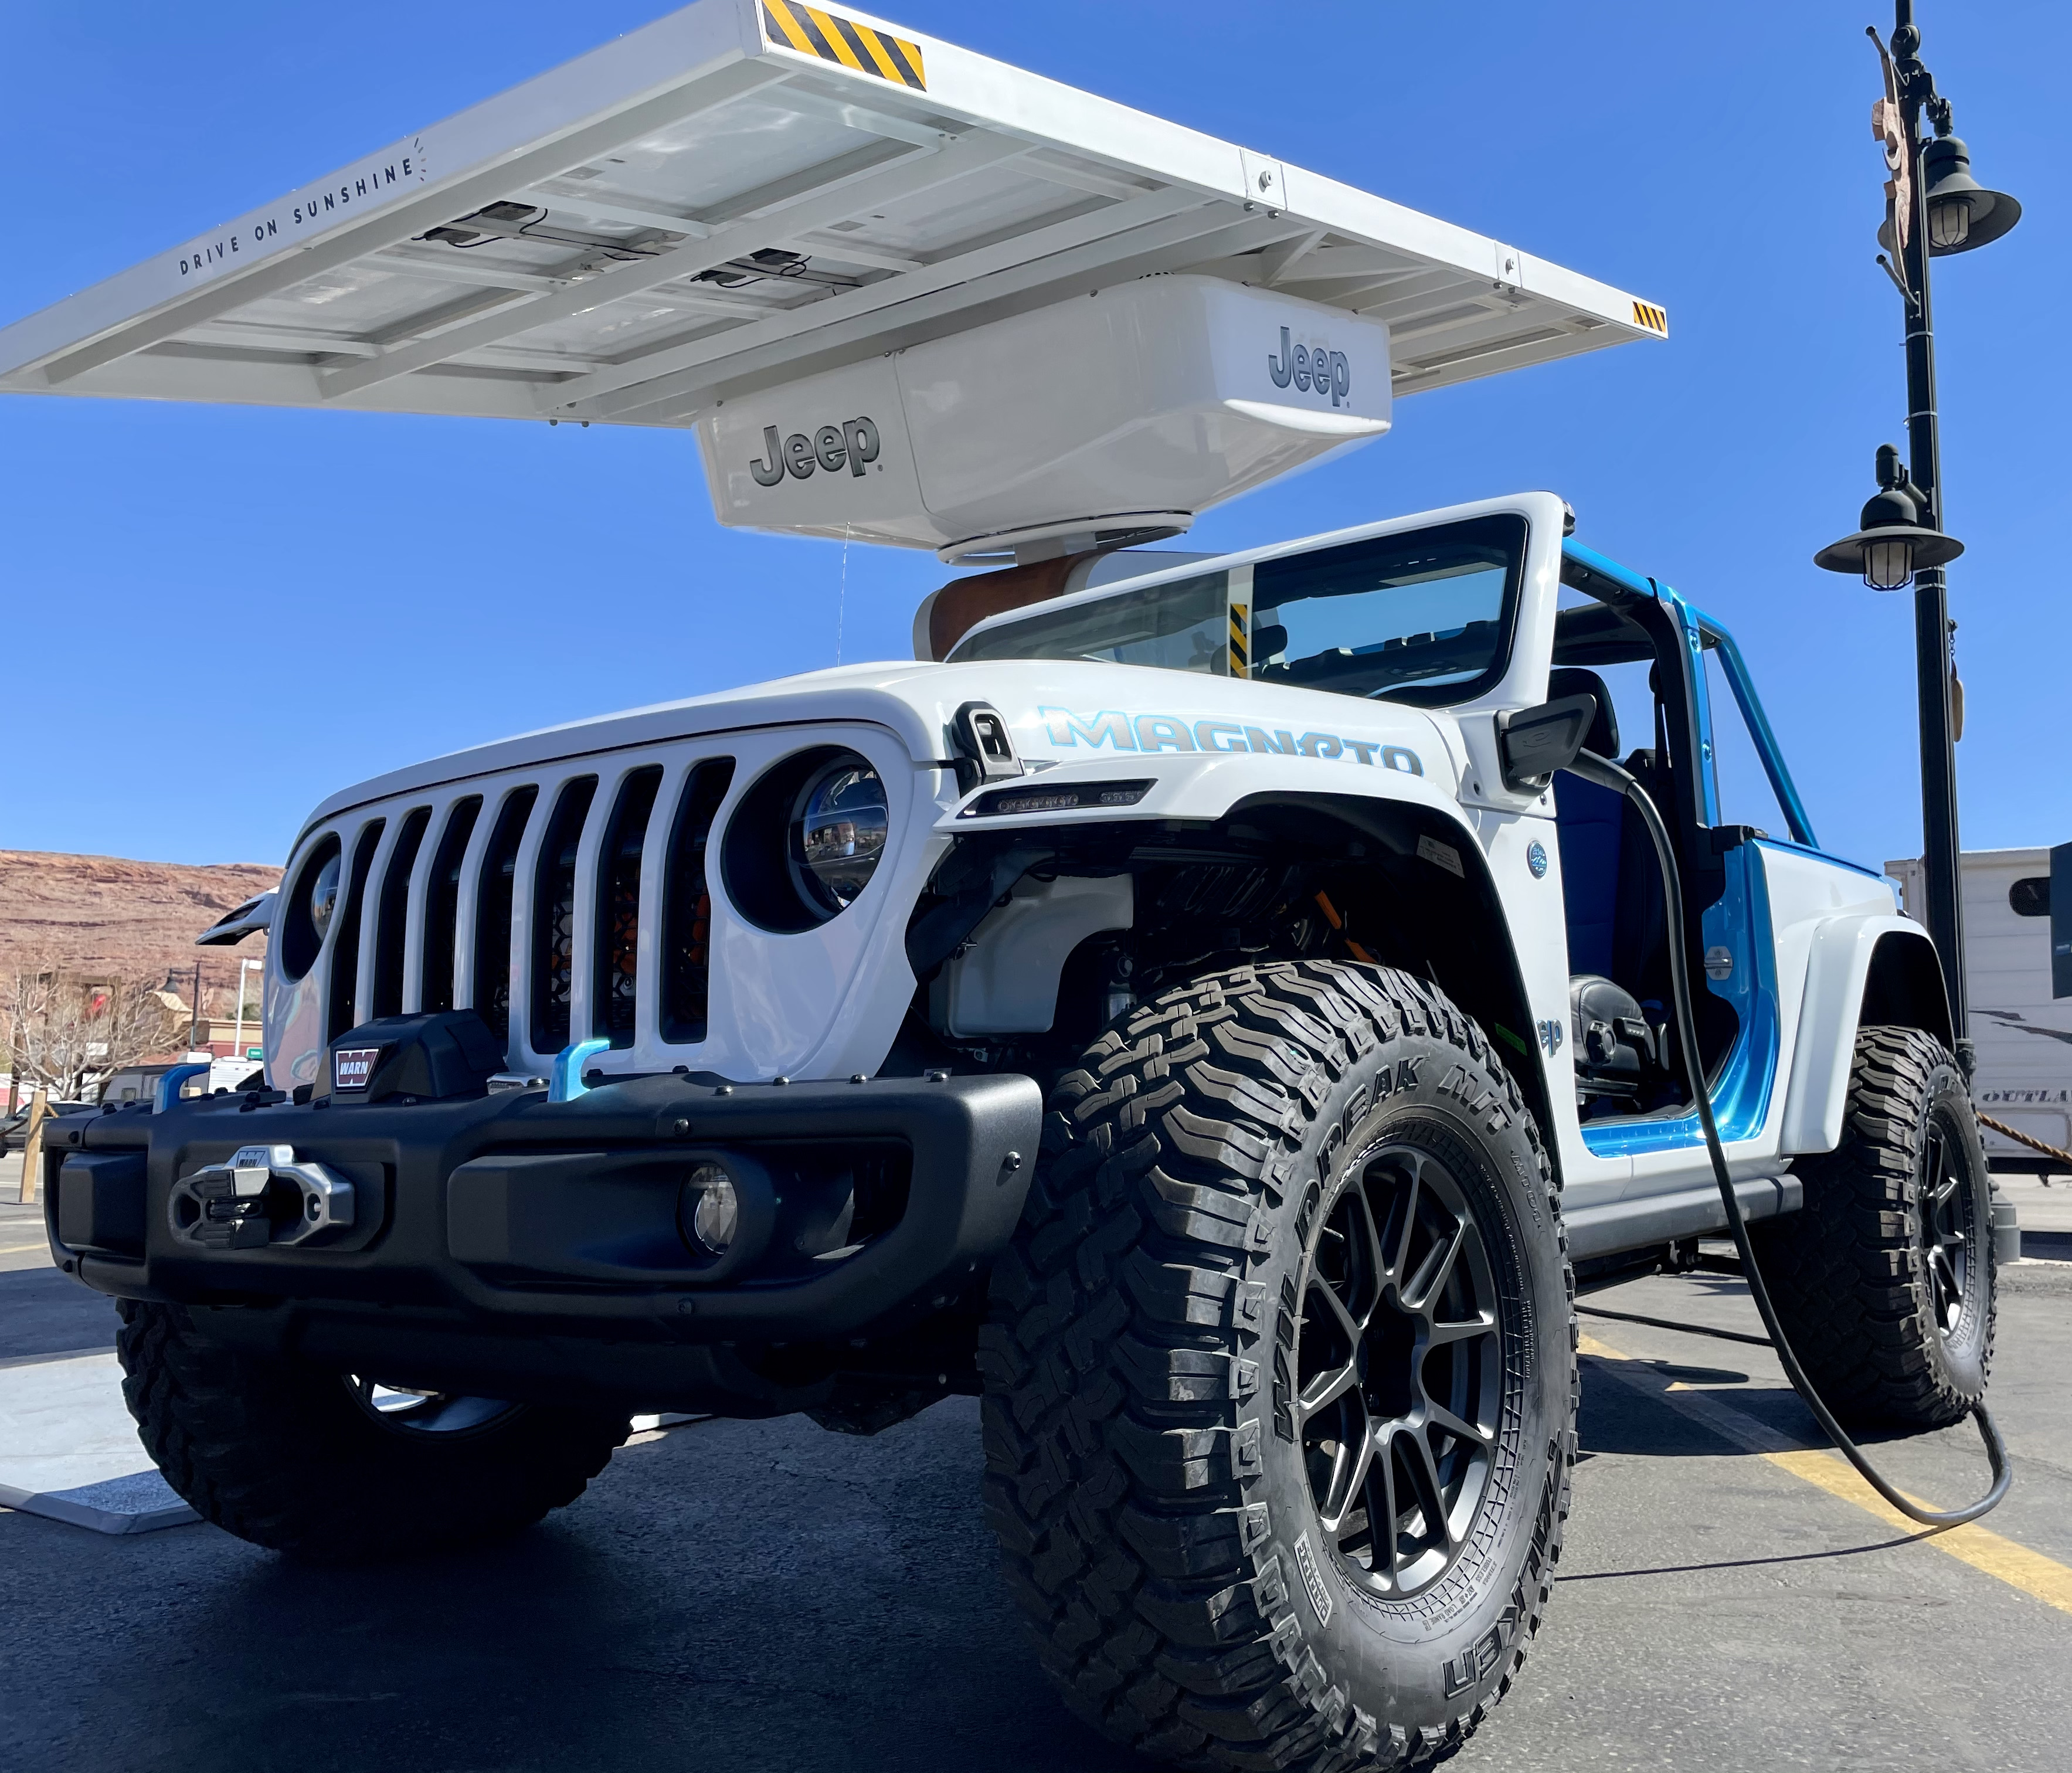 An up-looking angle at the Jeep Wrangler Magneto, a white Jeep with two seats — driver and passenger — and blue trim